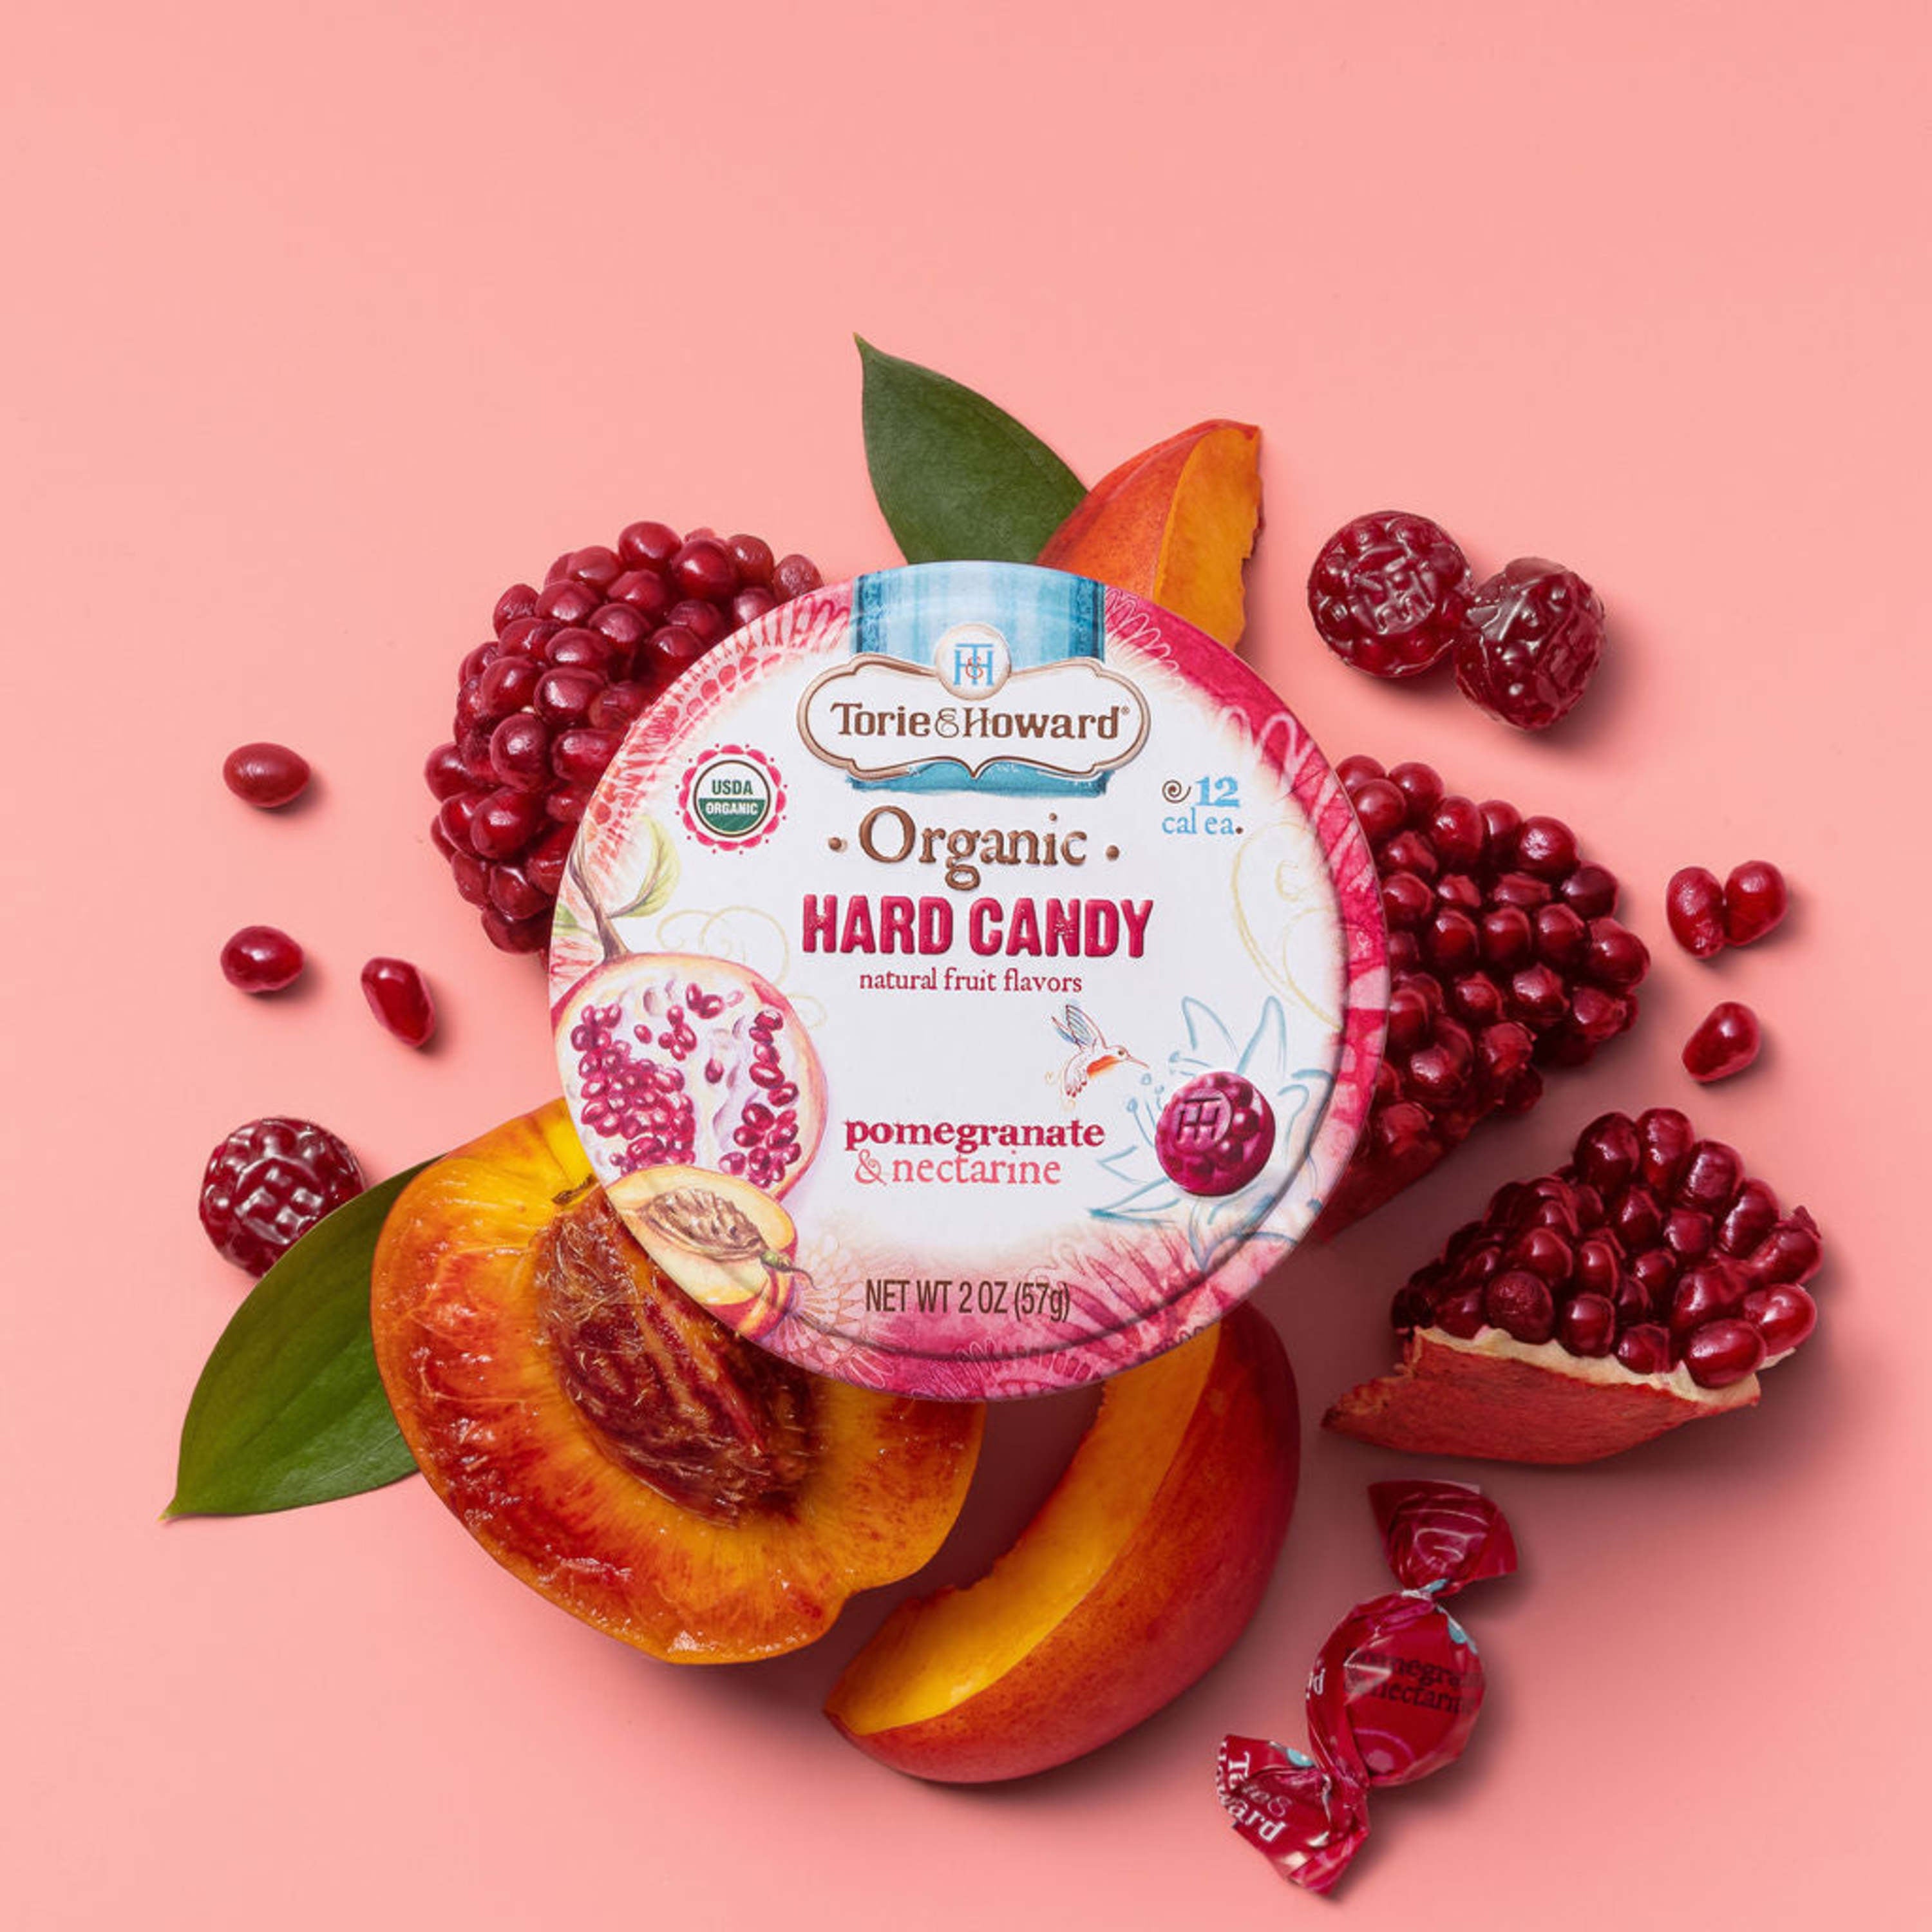 Torie & Howard Pomegranate & Nectarine Organic Hard Candy 2oz Tin on fresh fruit with candy pieces